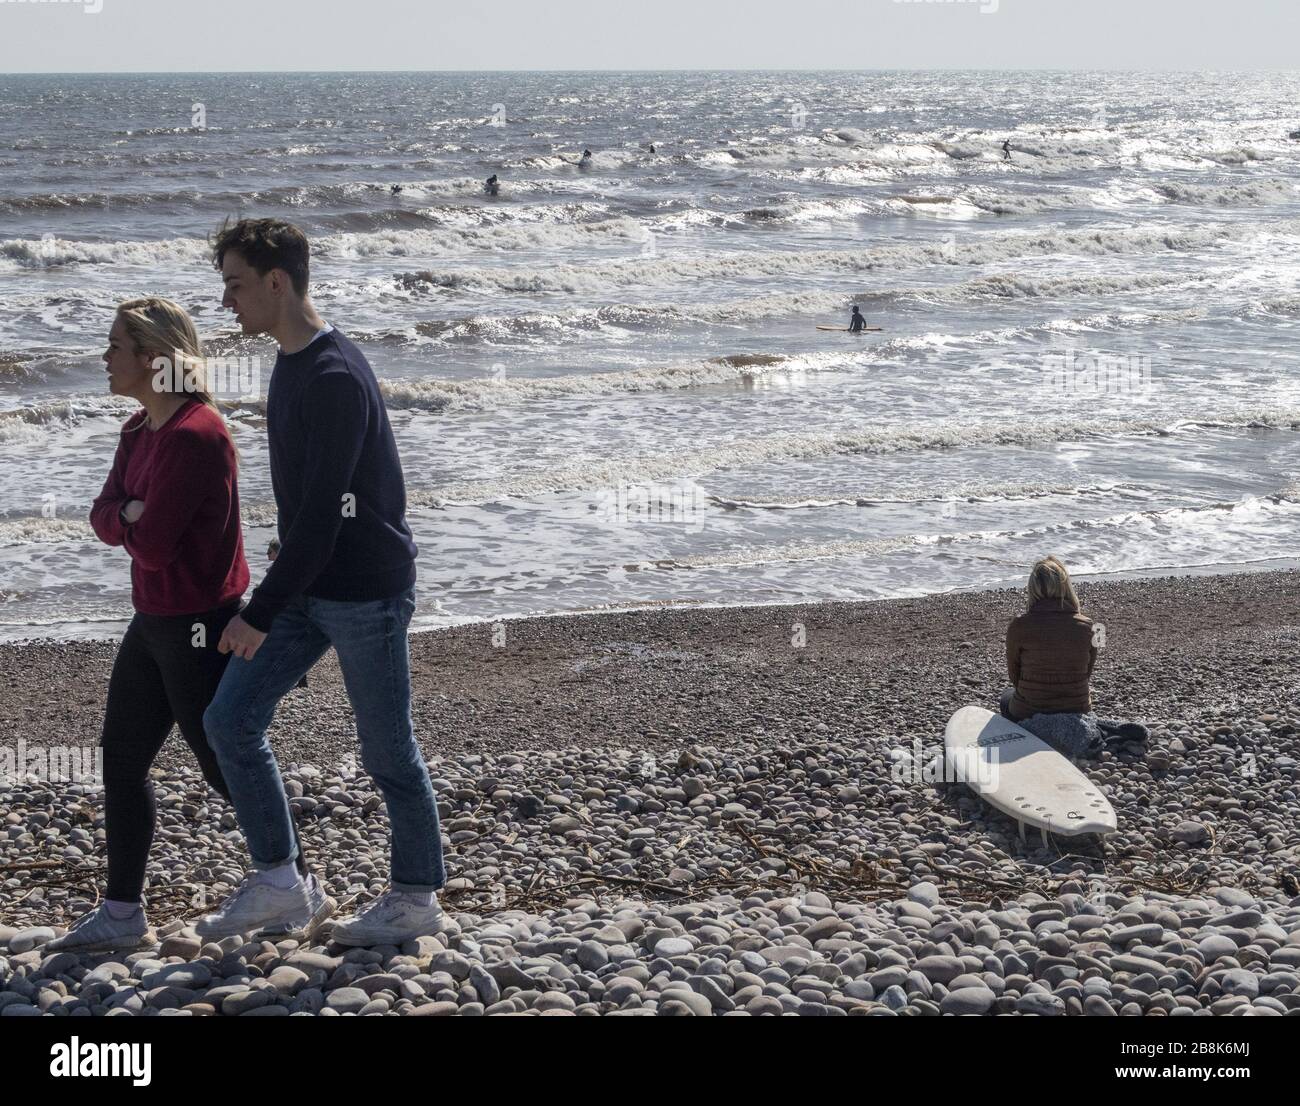 Sidmouth, Devon, 22nd March 20 Plenty of room on the beach at Sidmouth to keep some social distance from others on a glorious sunny day in Devon. Credit: Photo Central/Alamy Live News Stock Photo